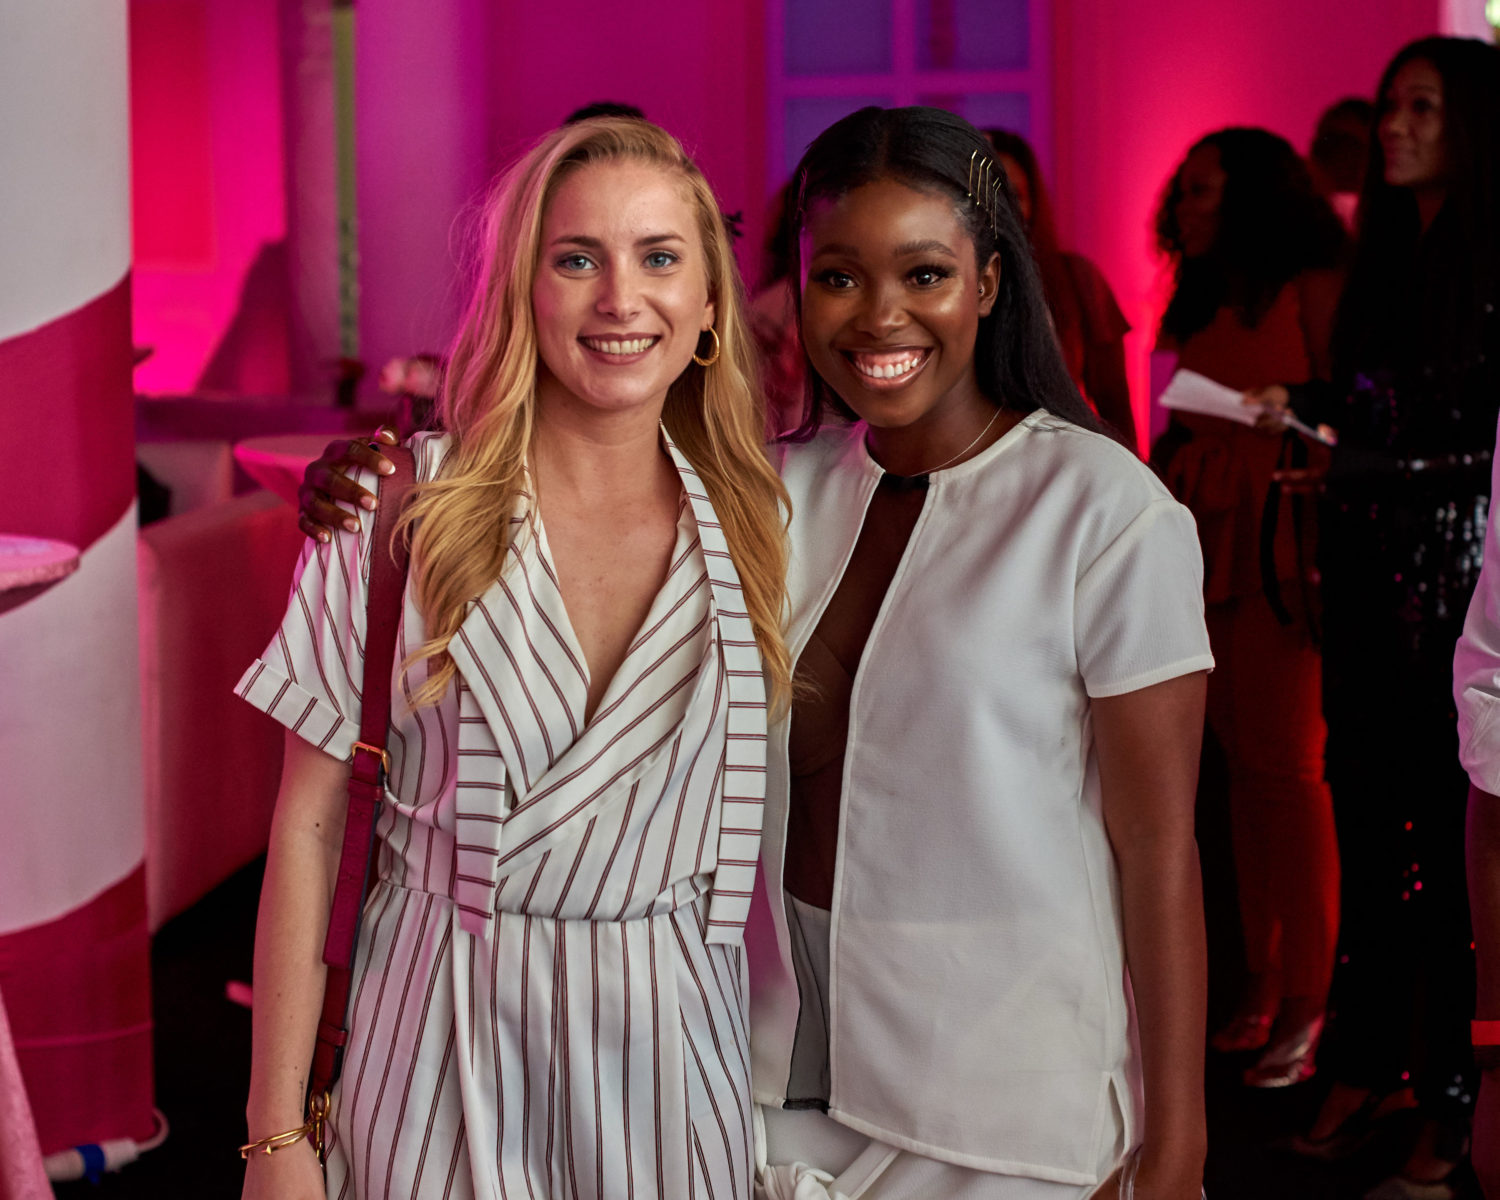 From The Pink Carpet to The Photo Booth At Lancôme’s New Fragrance Launch In Lagos, Here’s Every Photo Worth Seeing